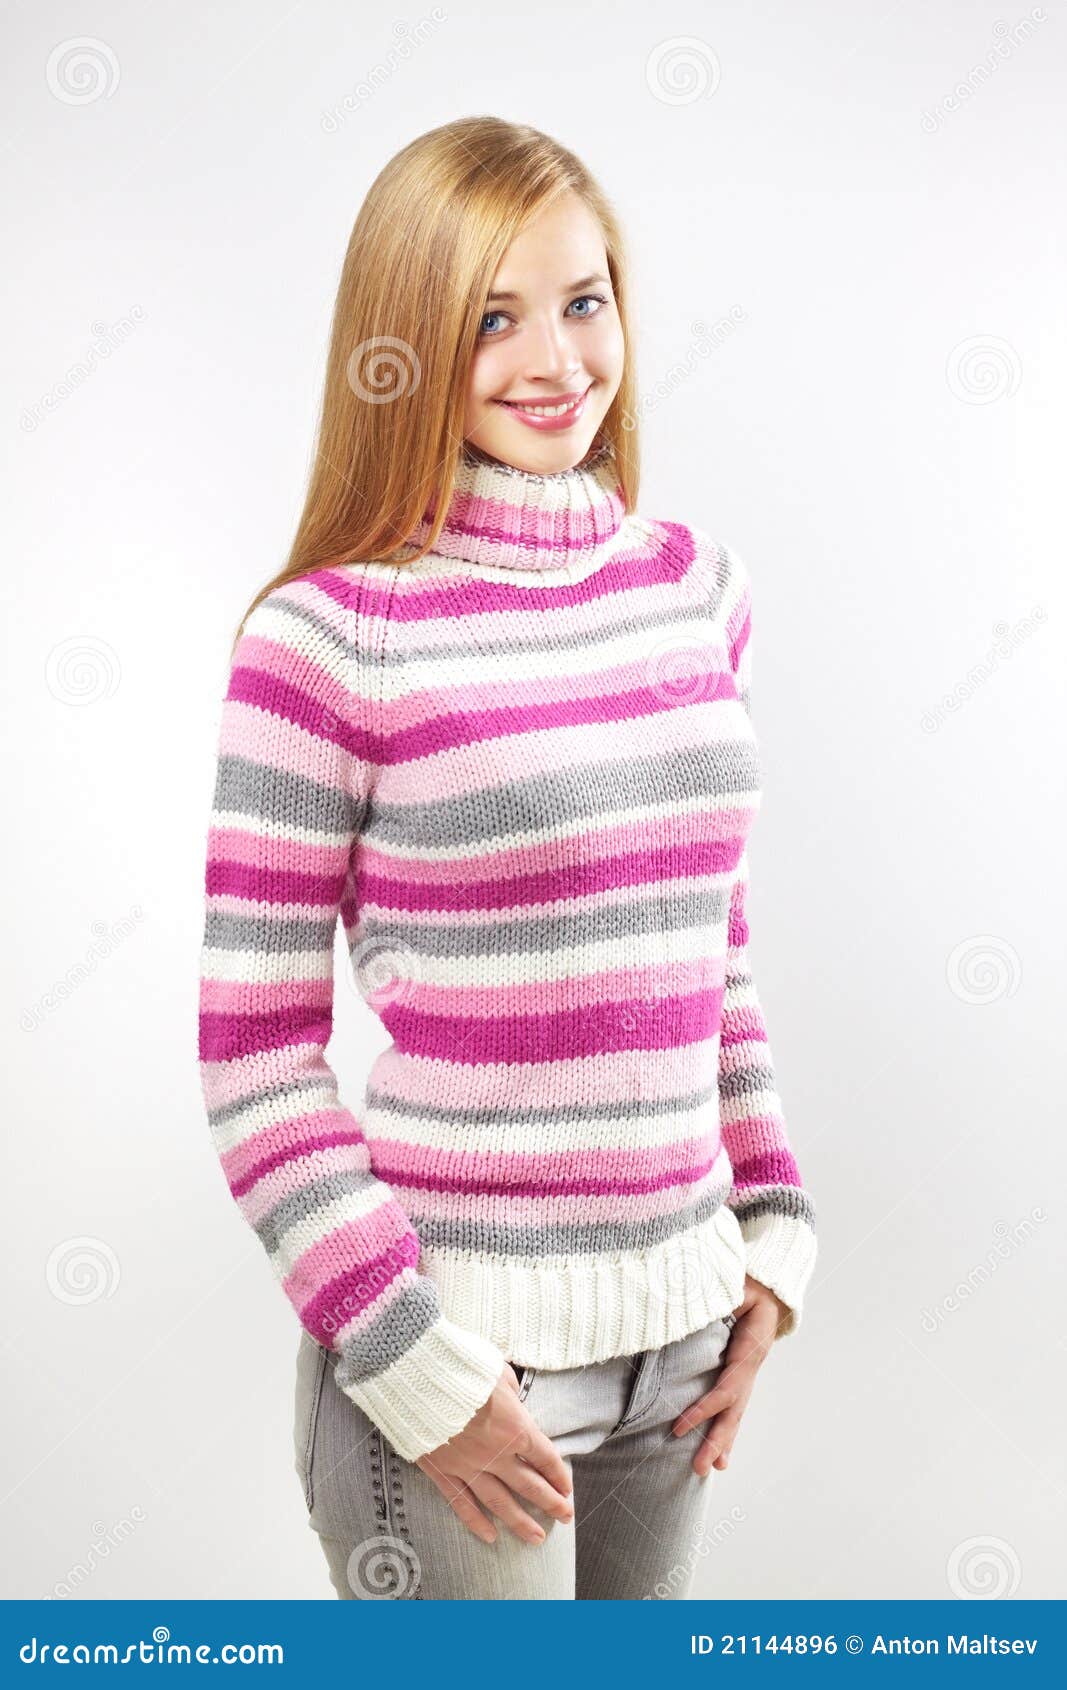 Season pretty tonight sweaters for women pictures photos viking material online